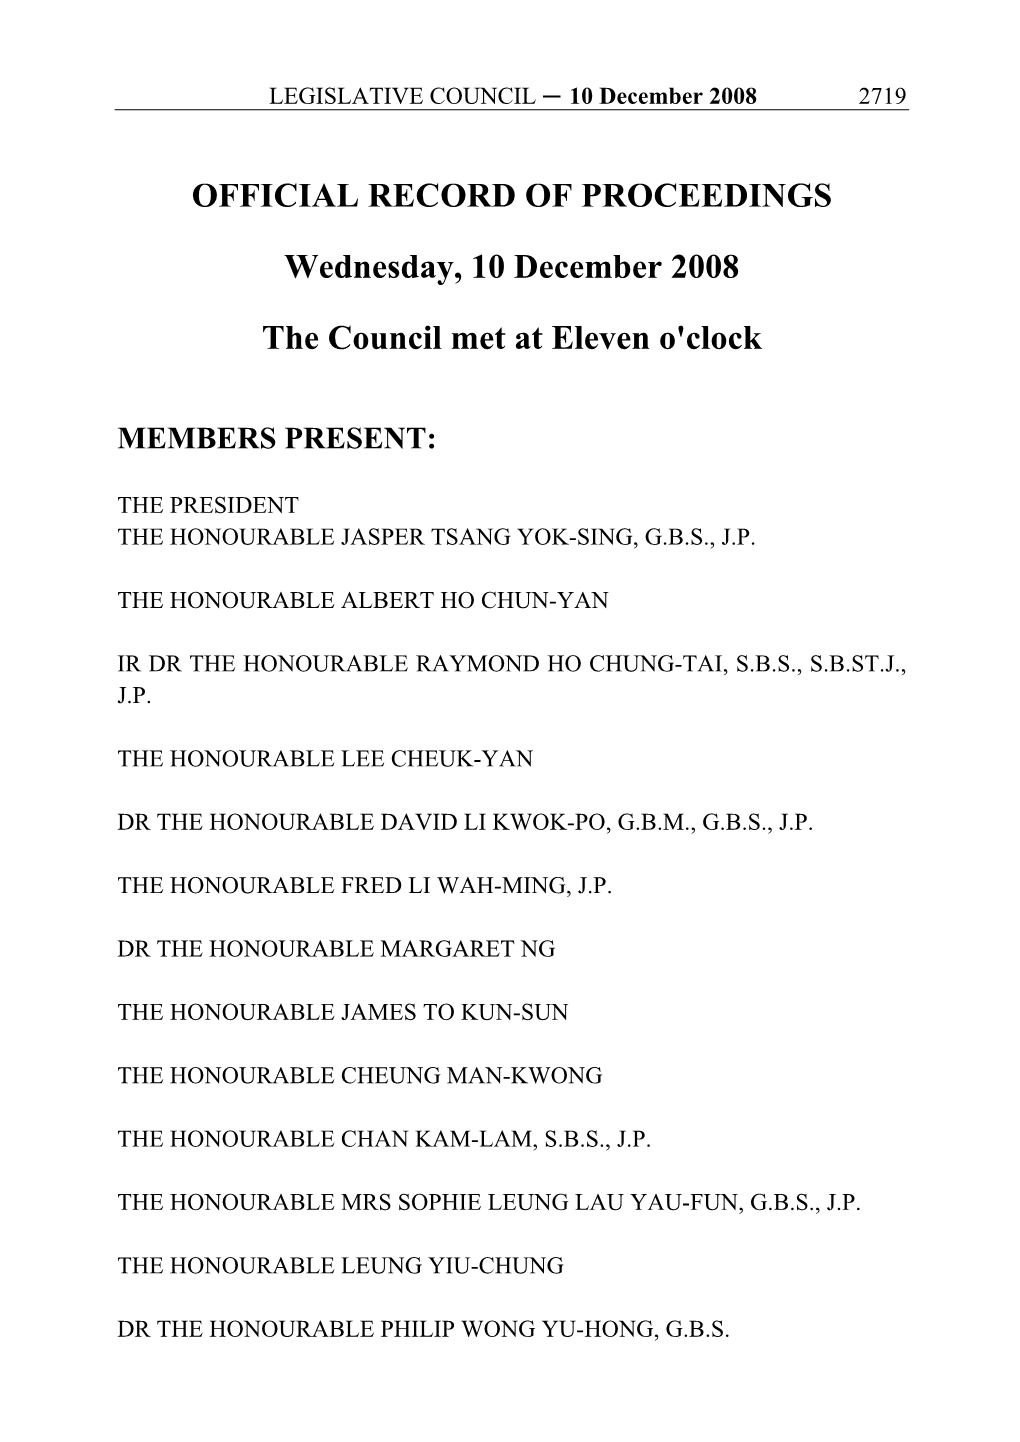 OFFICIAL RECORD of PROCEEDINGS Wednesday, 10